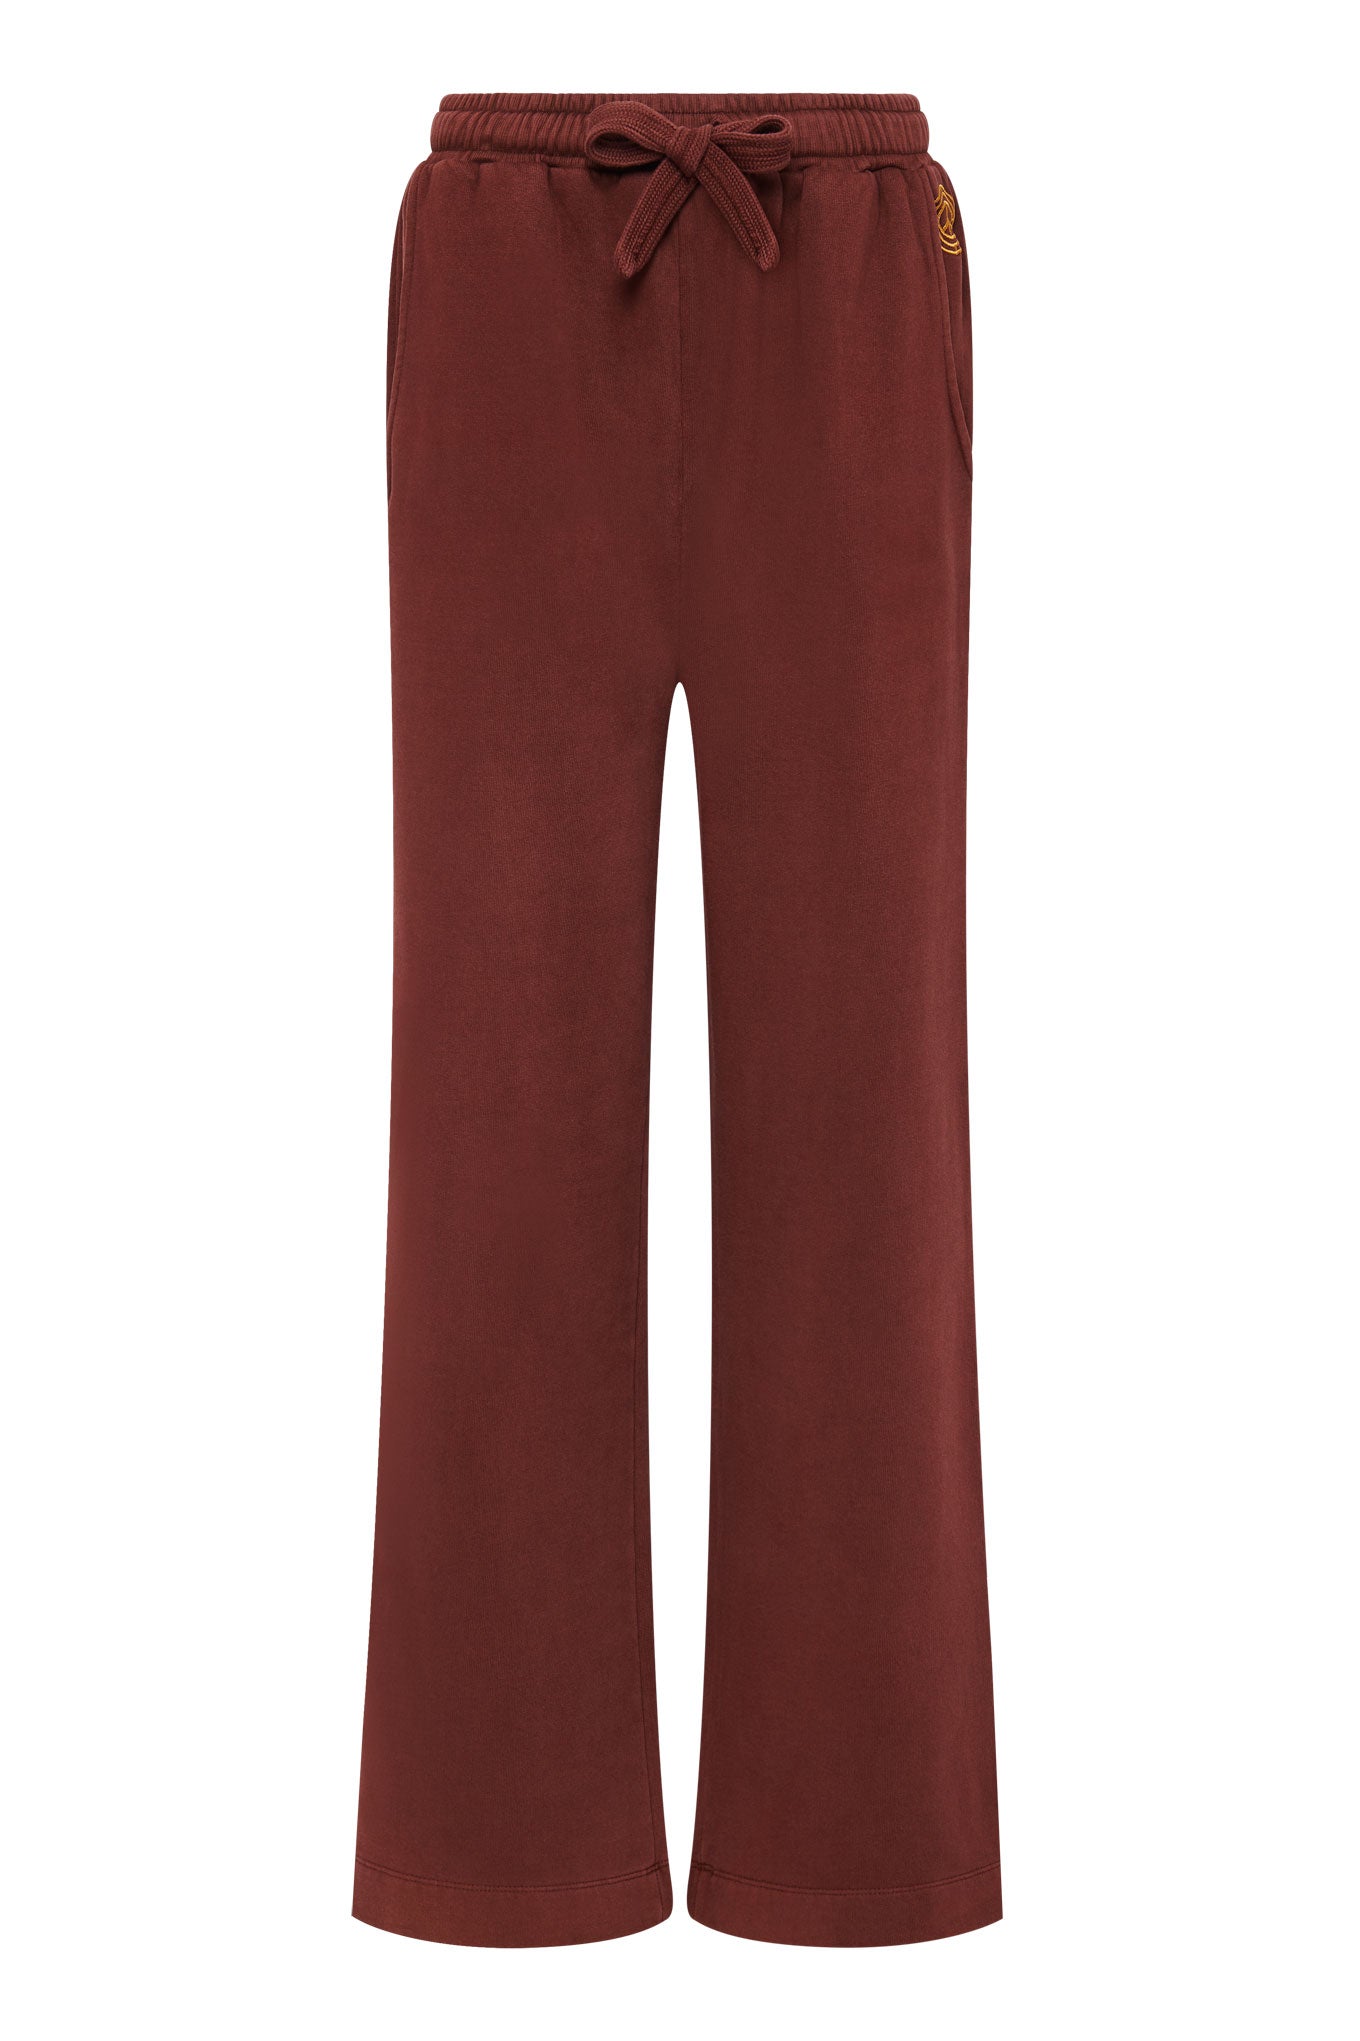 Brown, wide jogging pants SOLEIL made from 100% organic cotton by Komodo